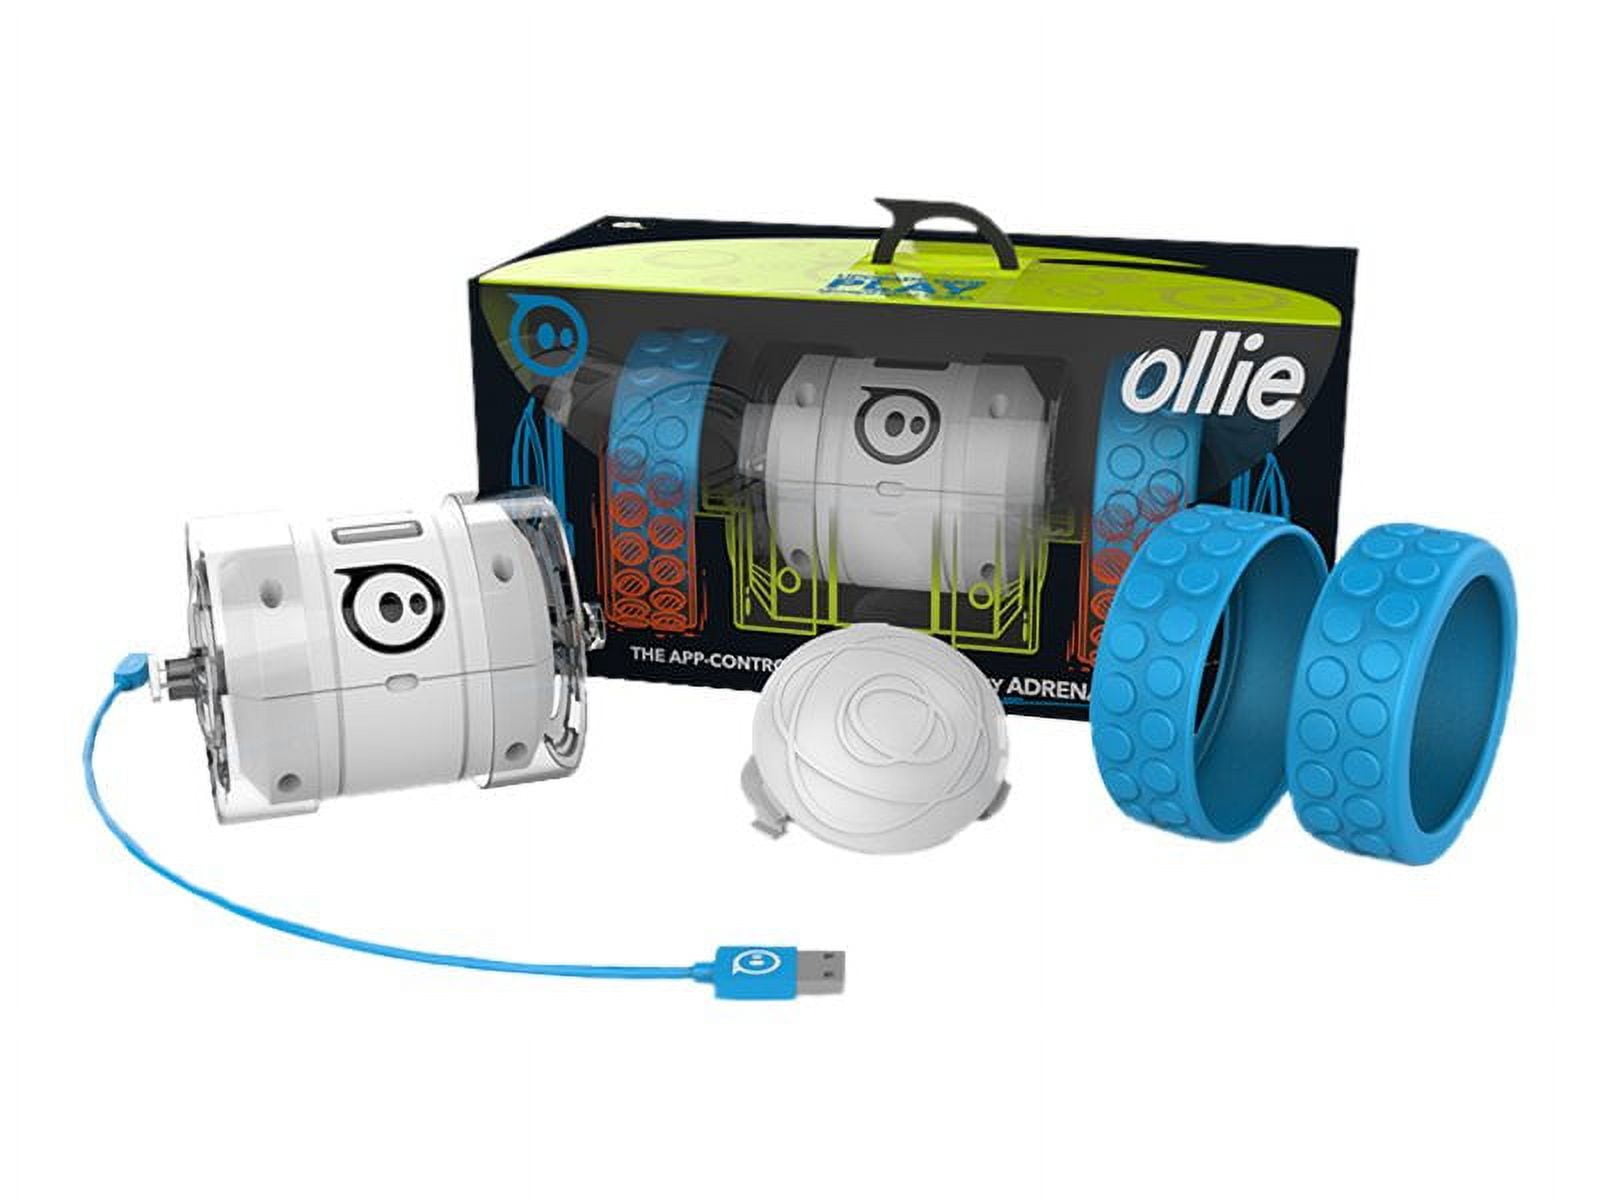 Sphero Finally Gets A Friend With Ollie, The Tubular Smartphone